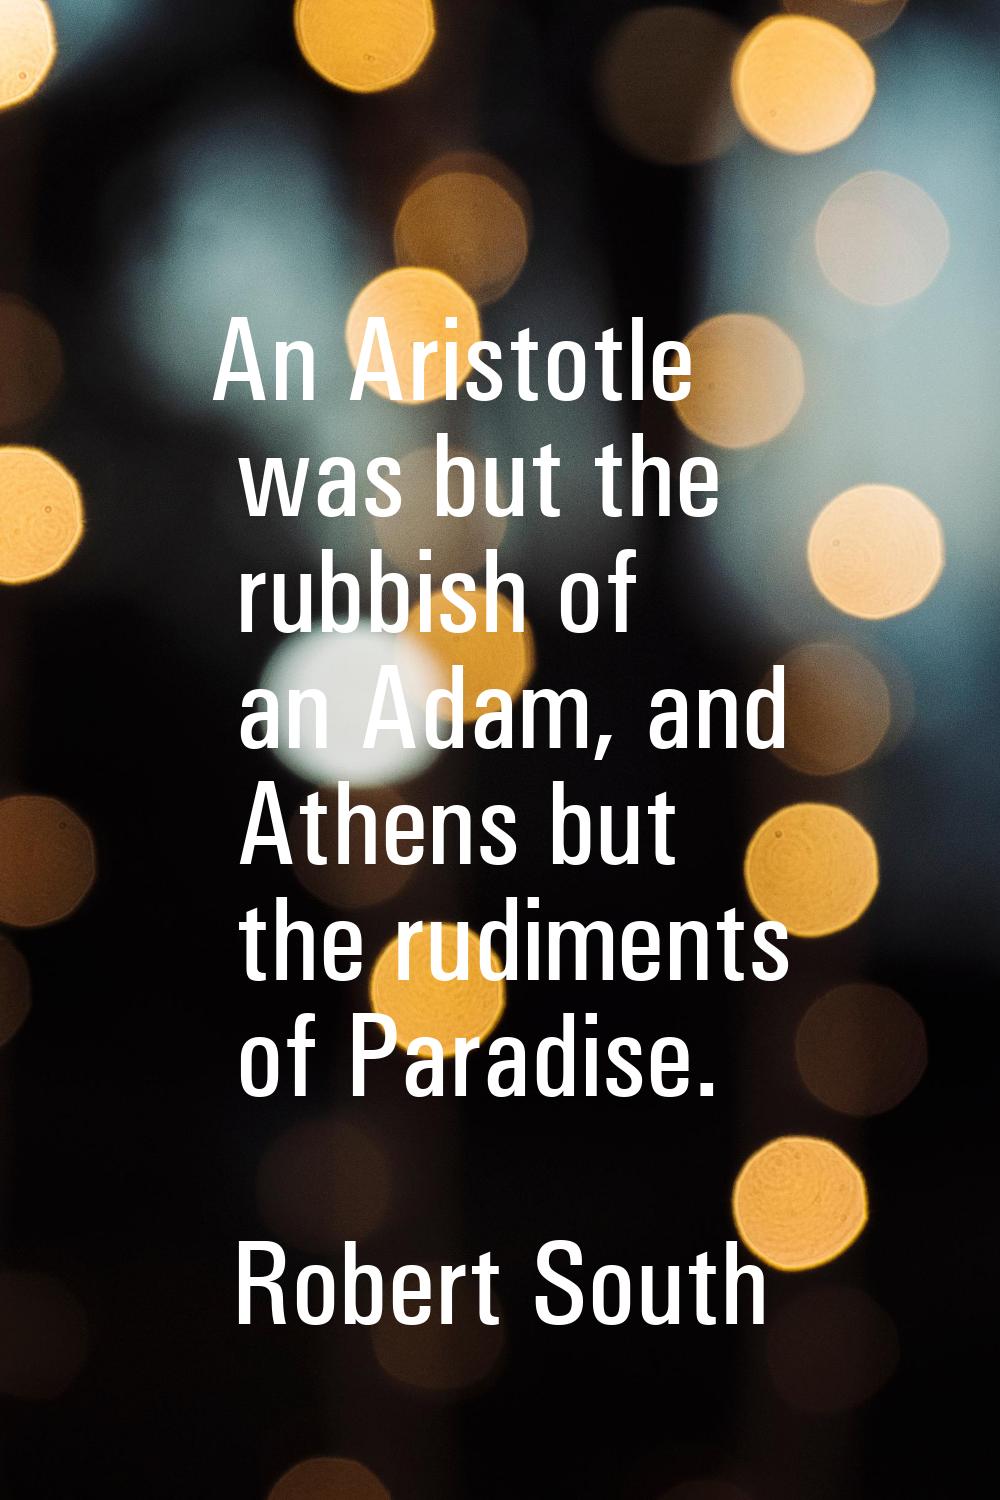 An Aristotle was but the rubbish of an Adam, and Athens but the rudiments of Paradise.